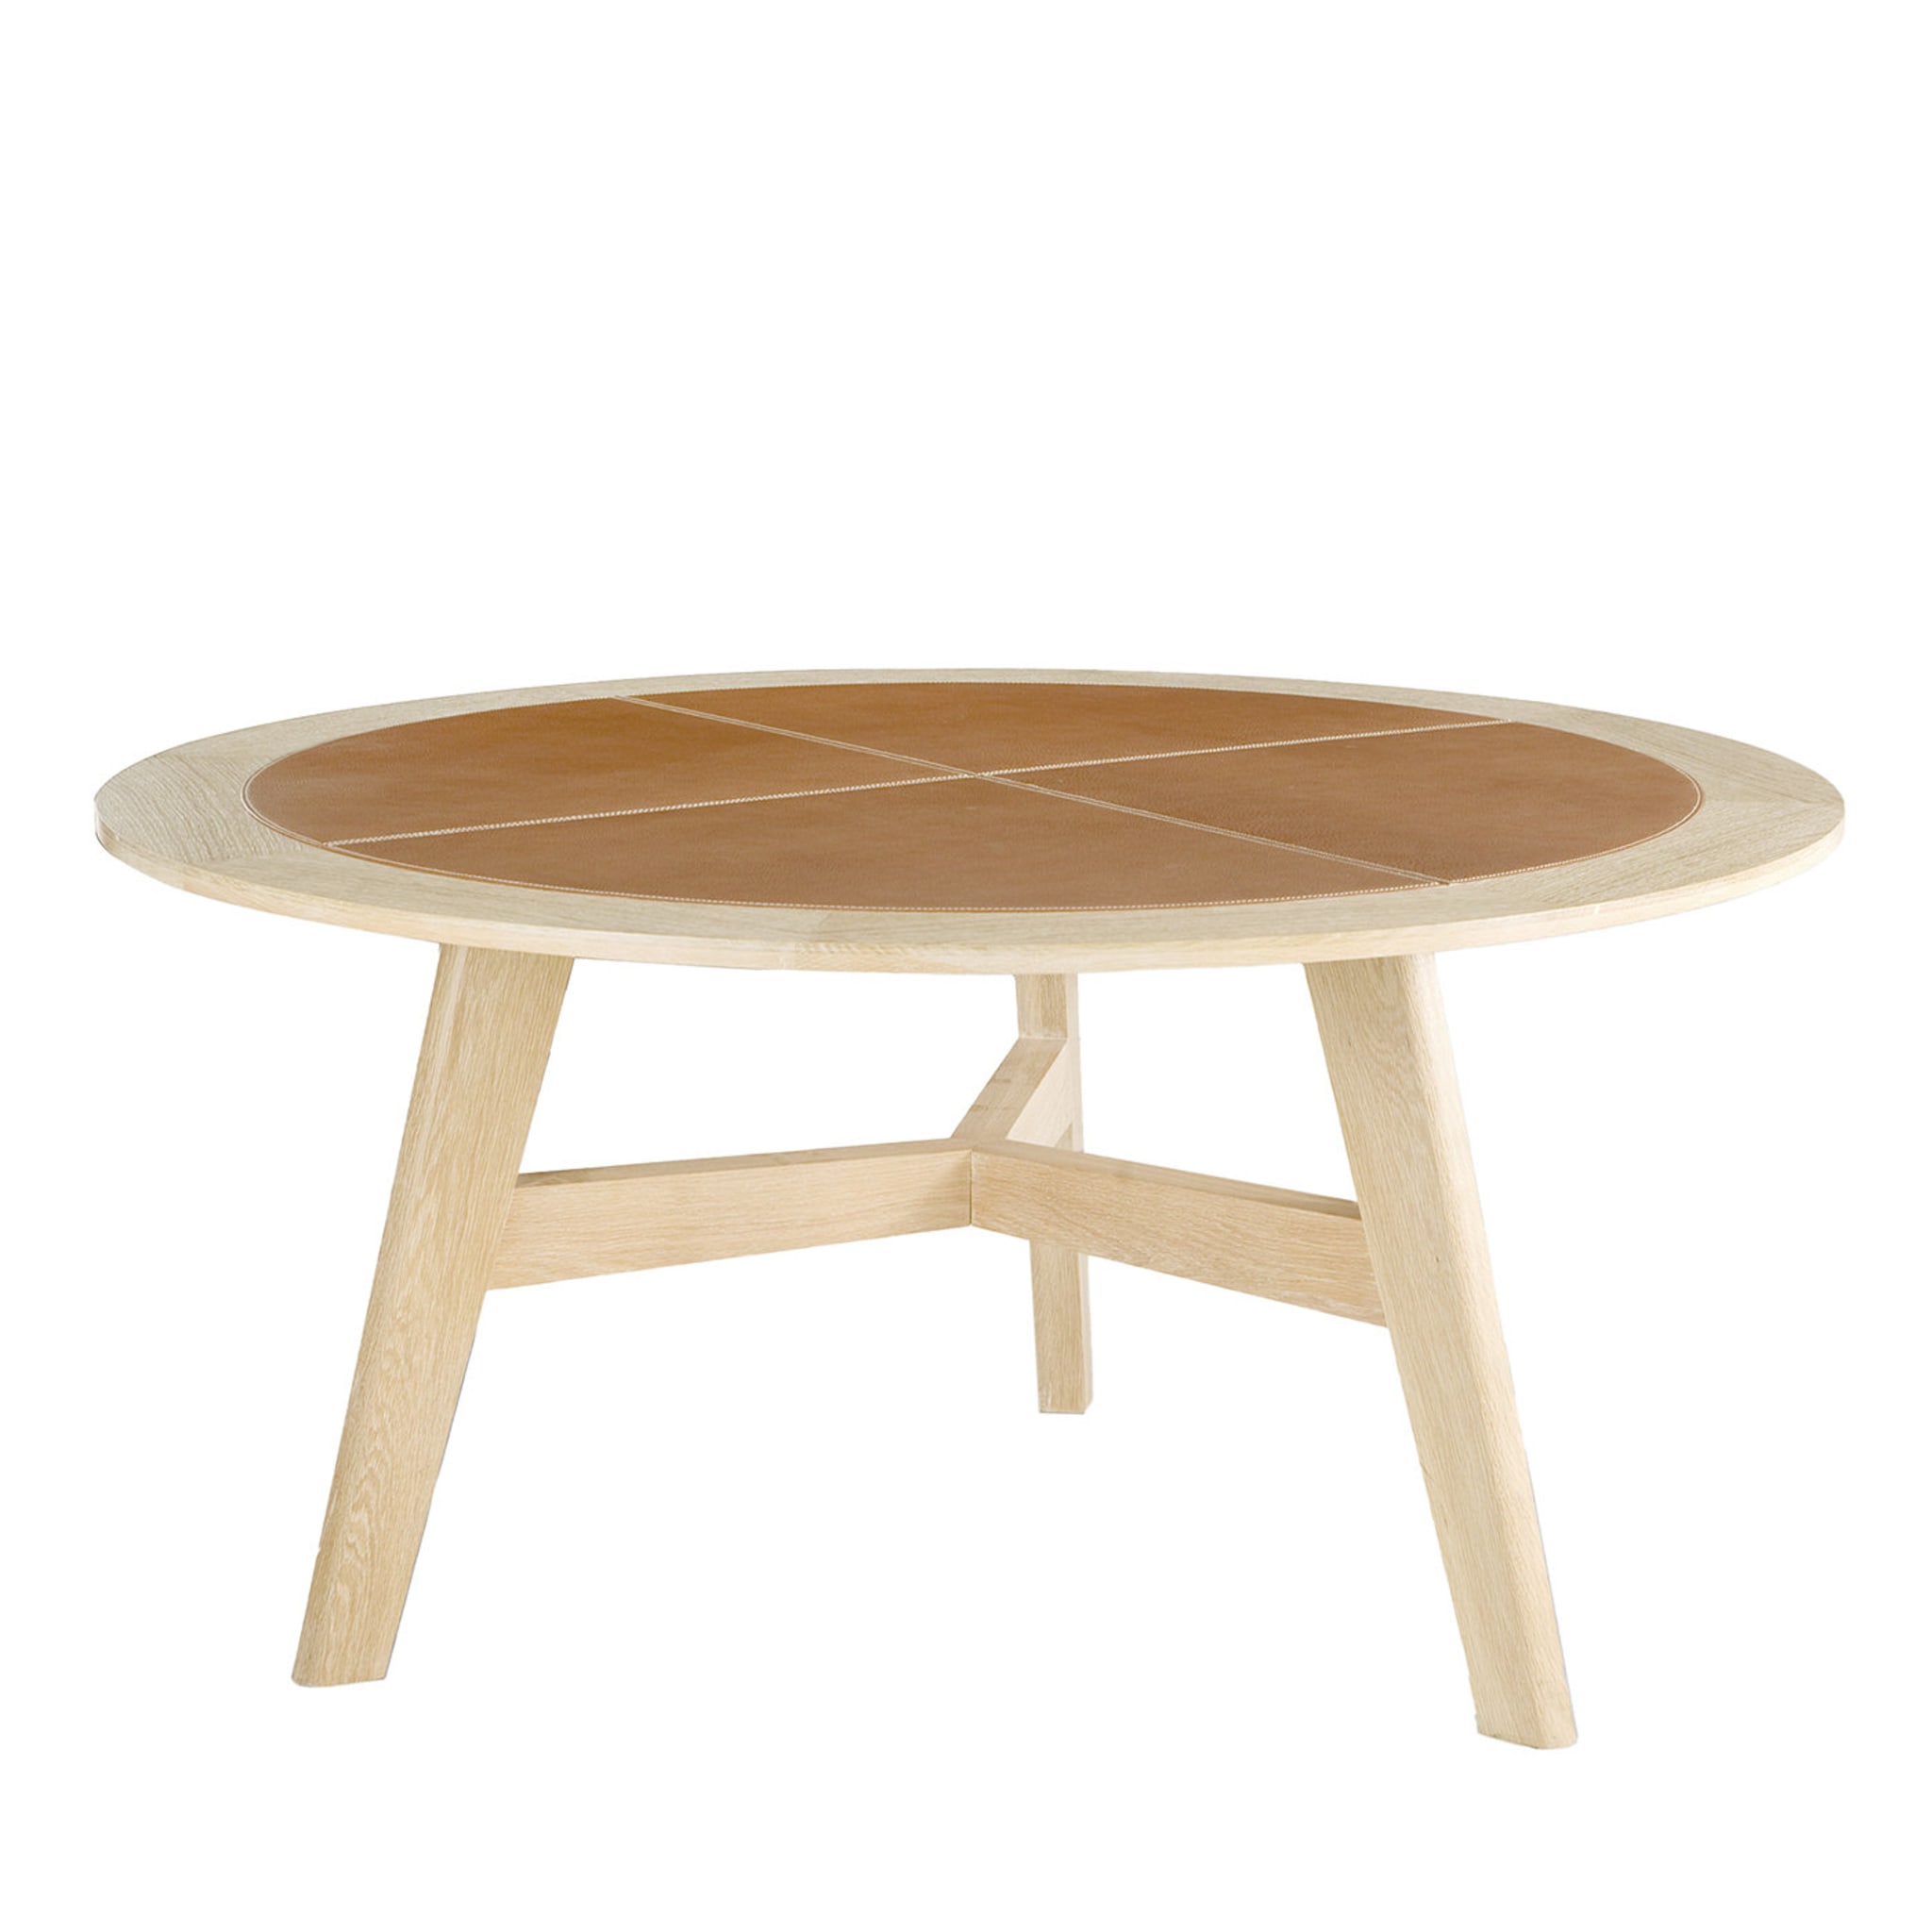 Round Dining Table with Leather Top by Michele Bonan - Main view